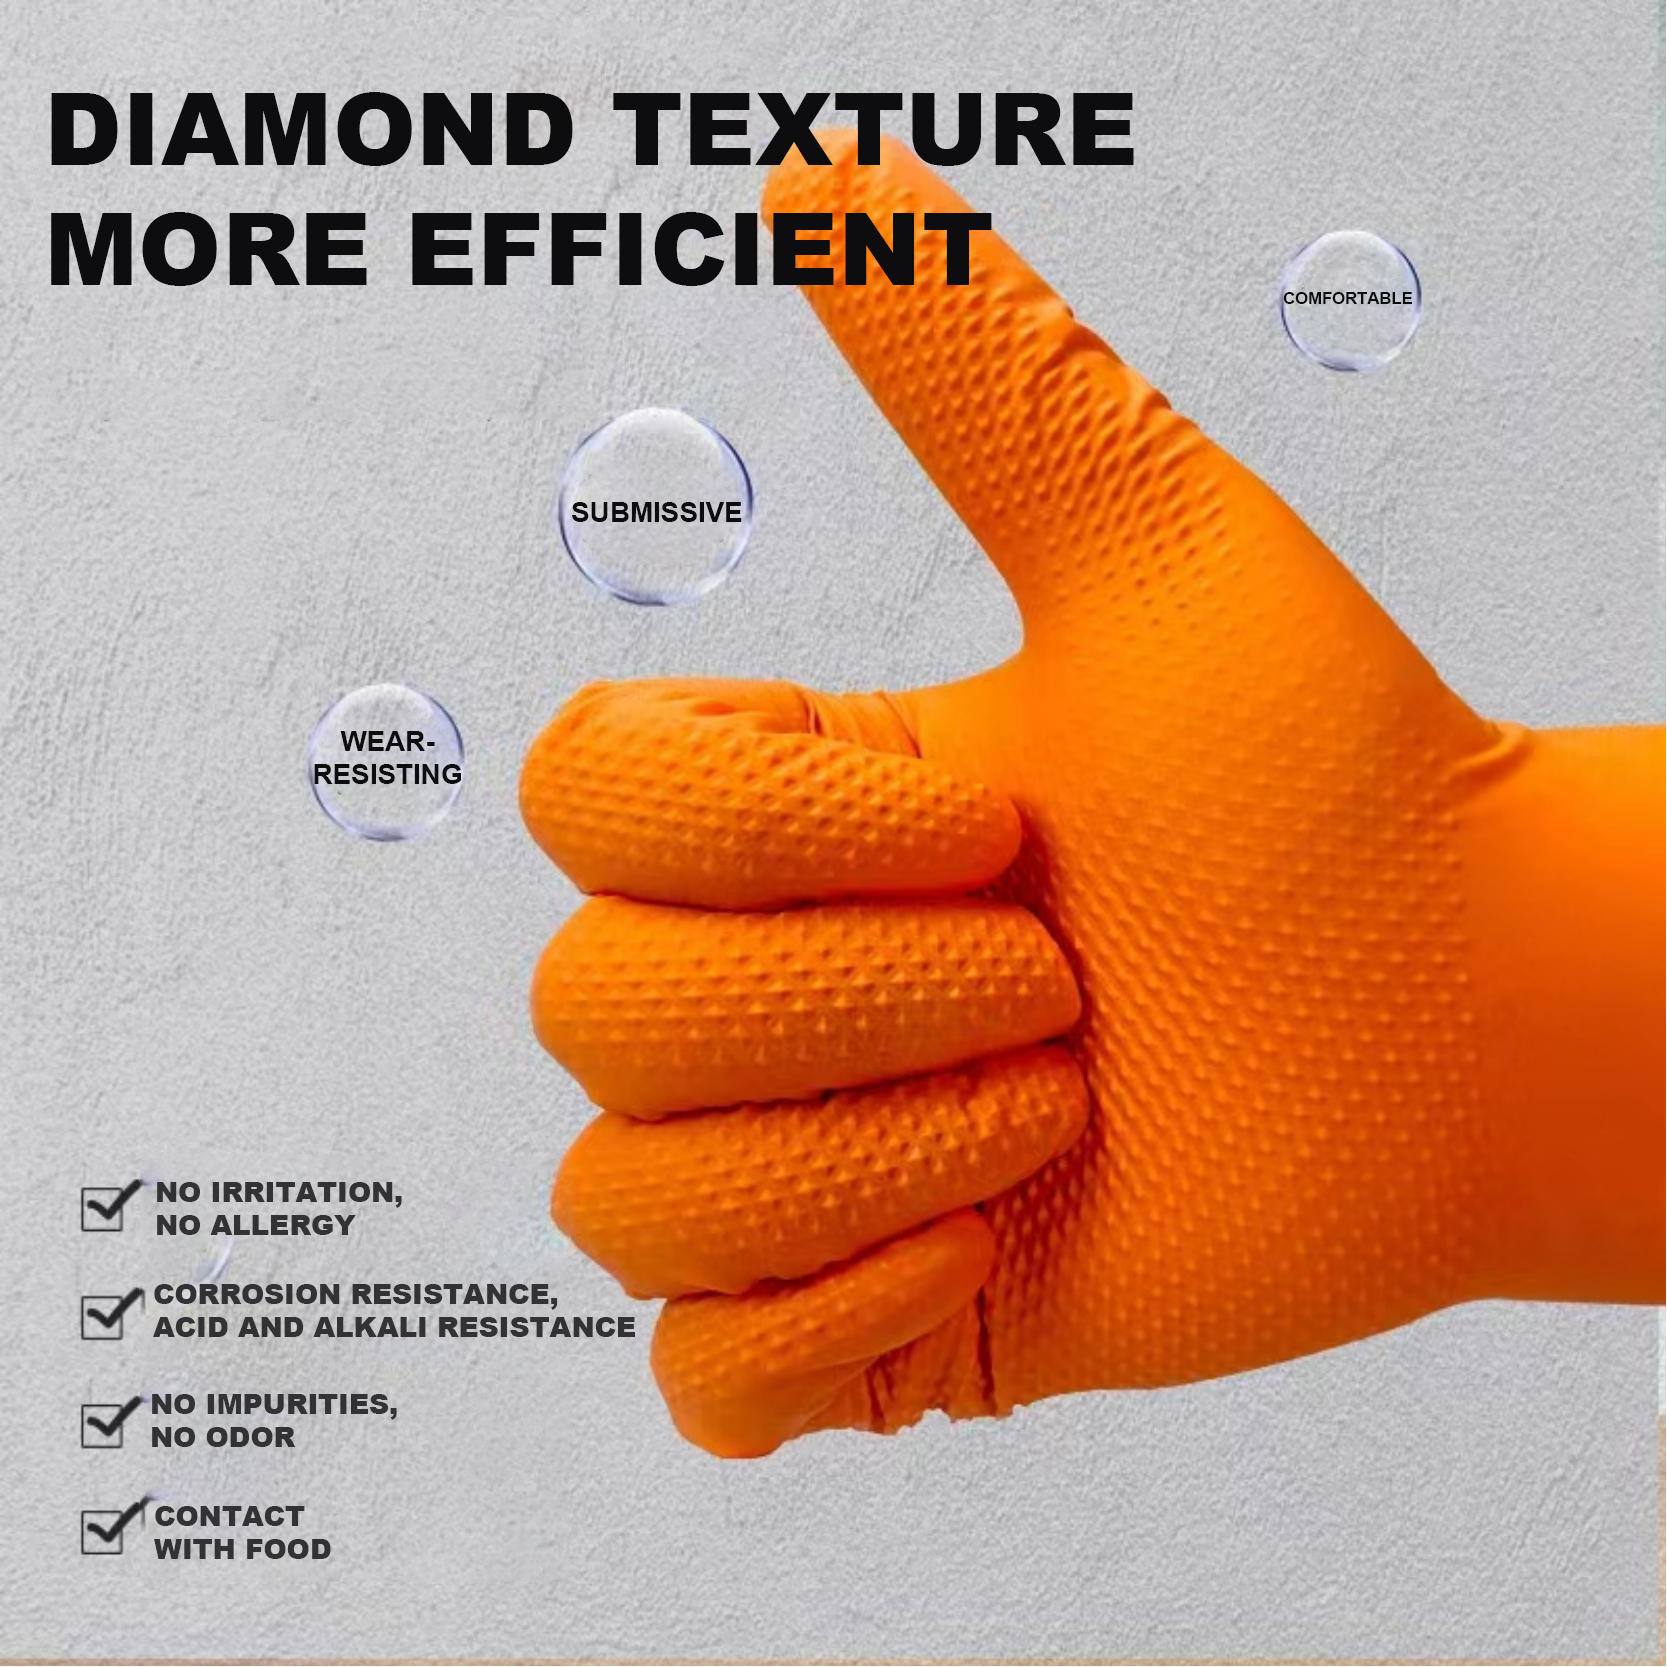 Disposable Car Mechanical Repair Glove Powder Free Nitrile Hand Spray Paint Gloves Industrial Nitrile Protective Gloves2